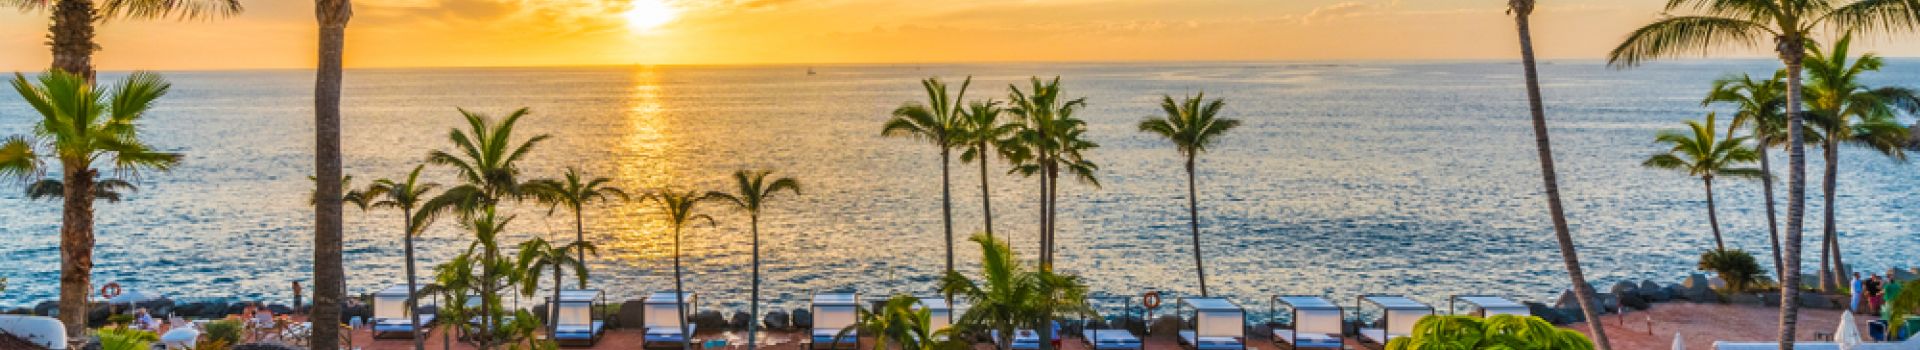 Cheap holidays to Tenerife with Cassidy Travel